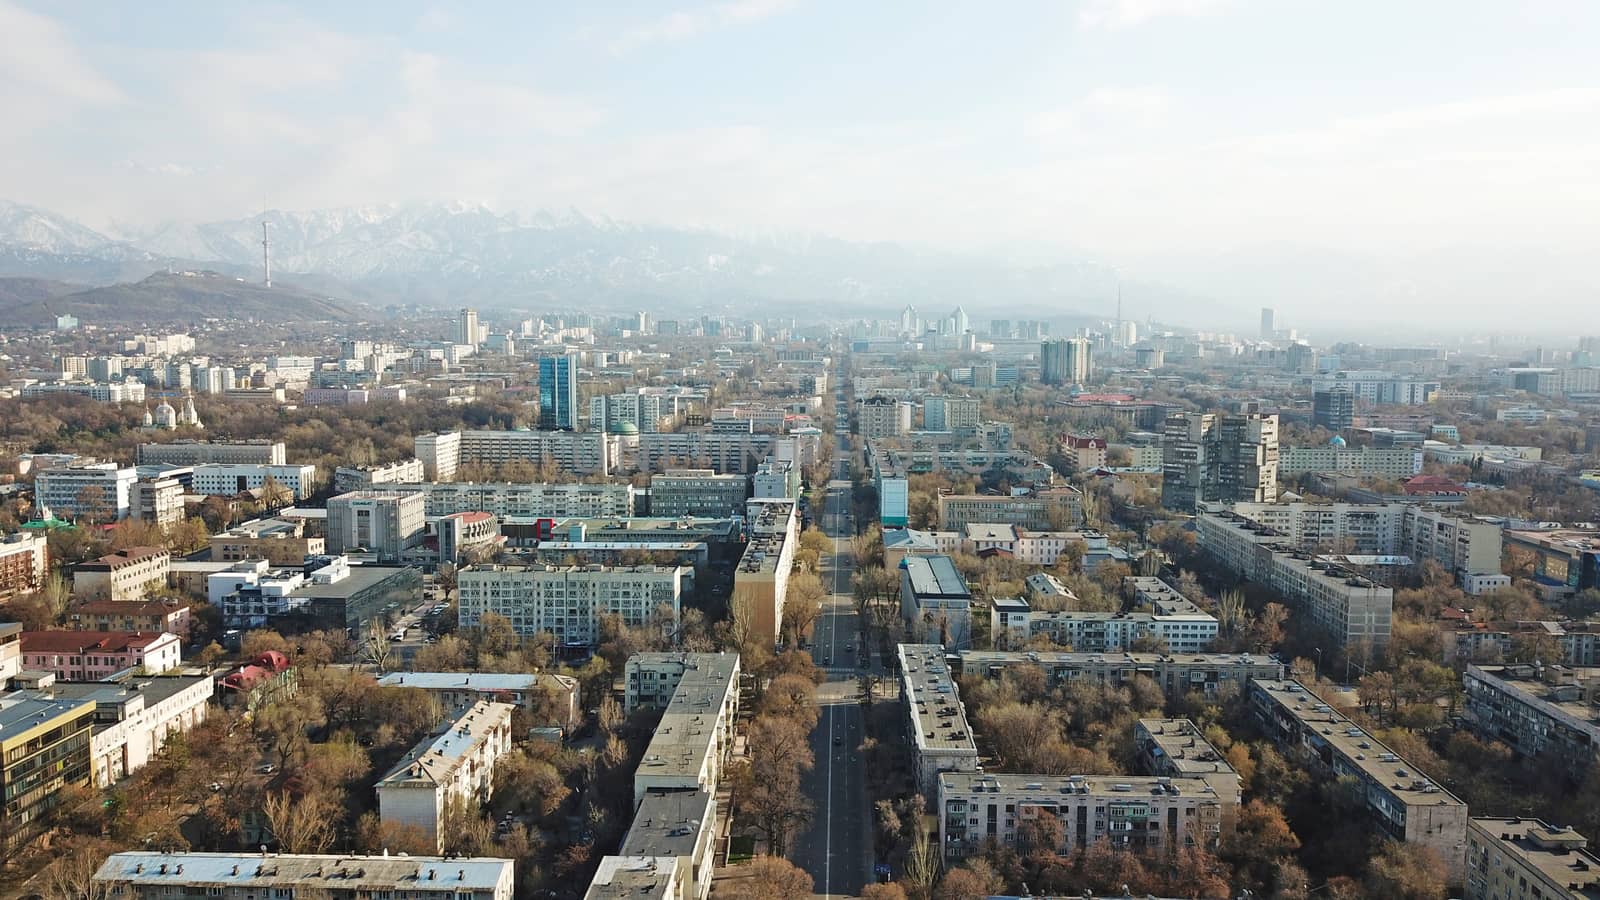 Spring city of Almaty during the quarantine period by Passcal